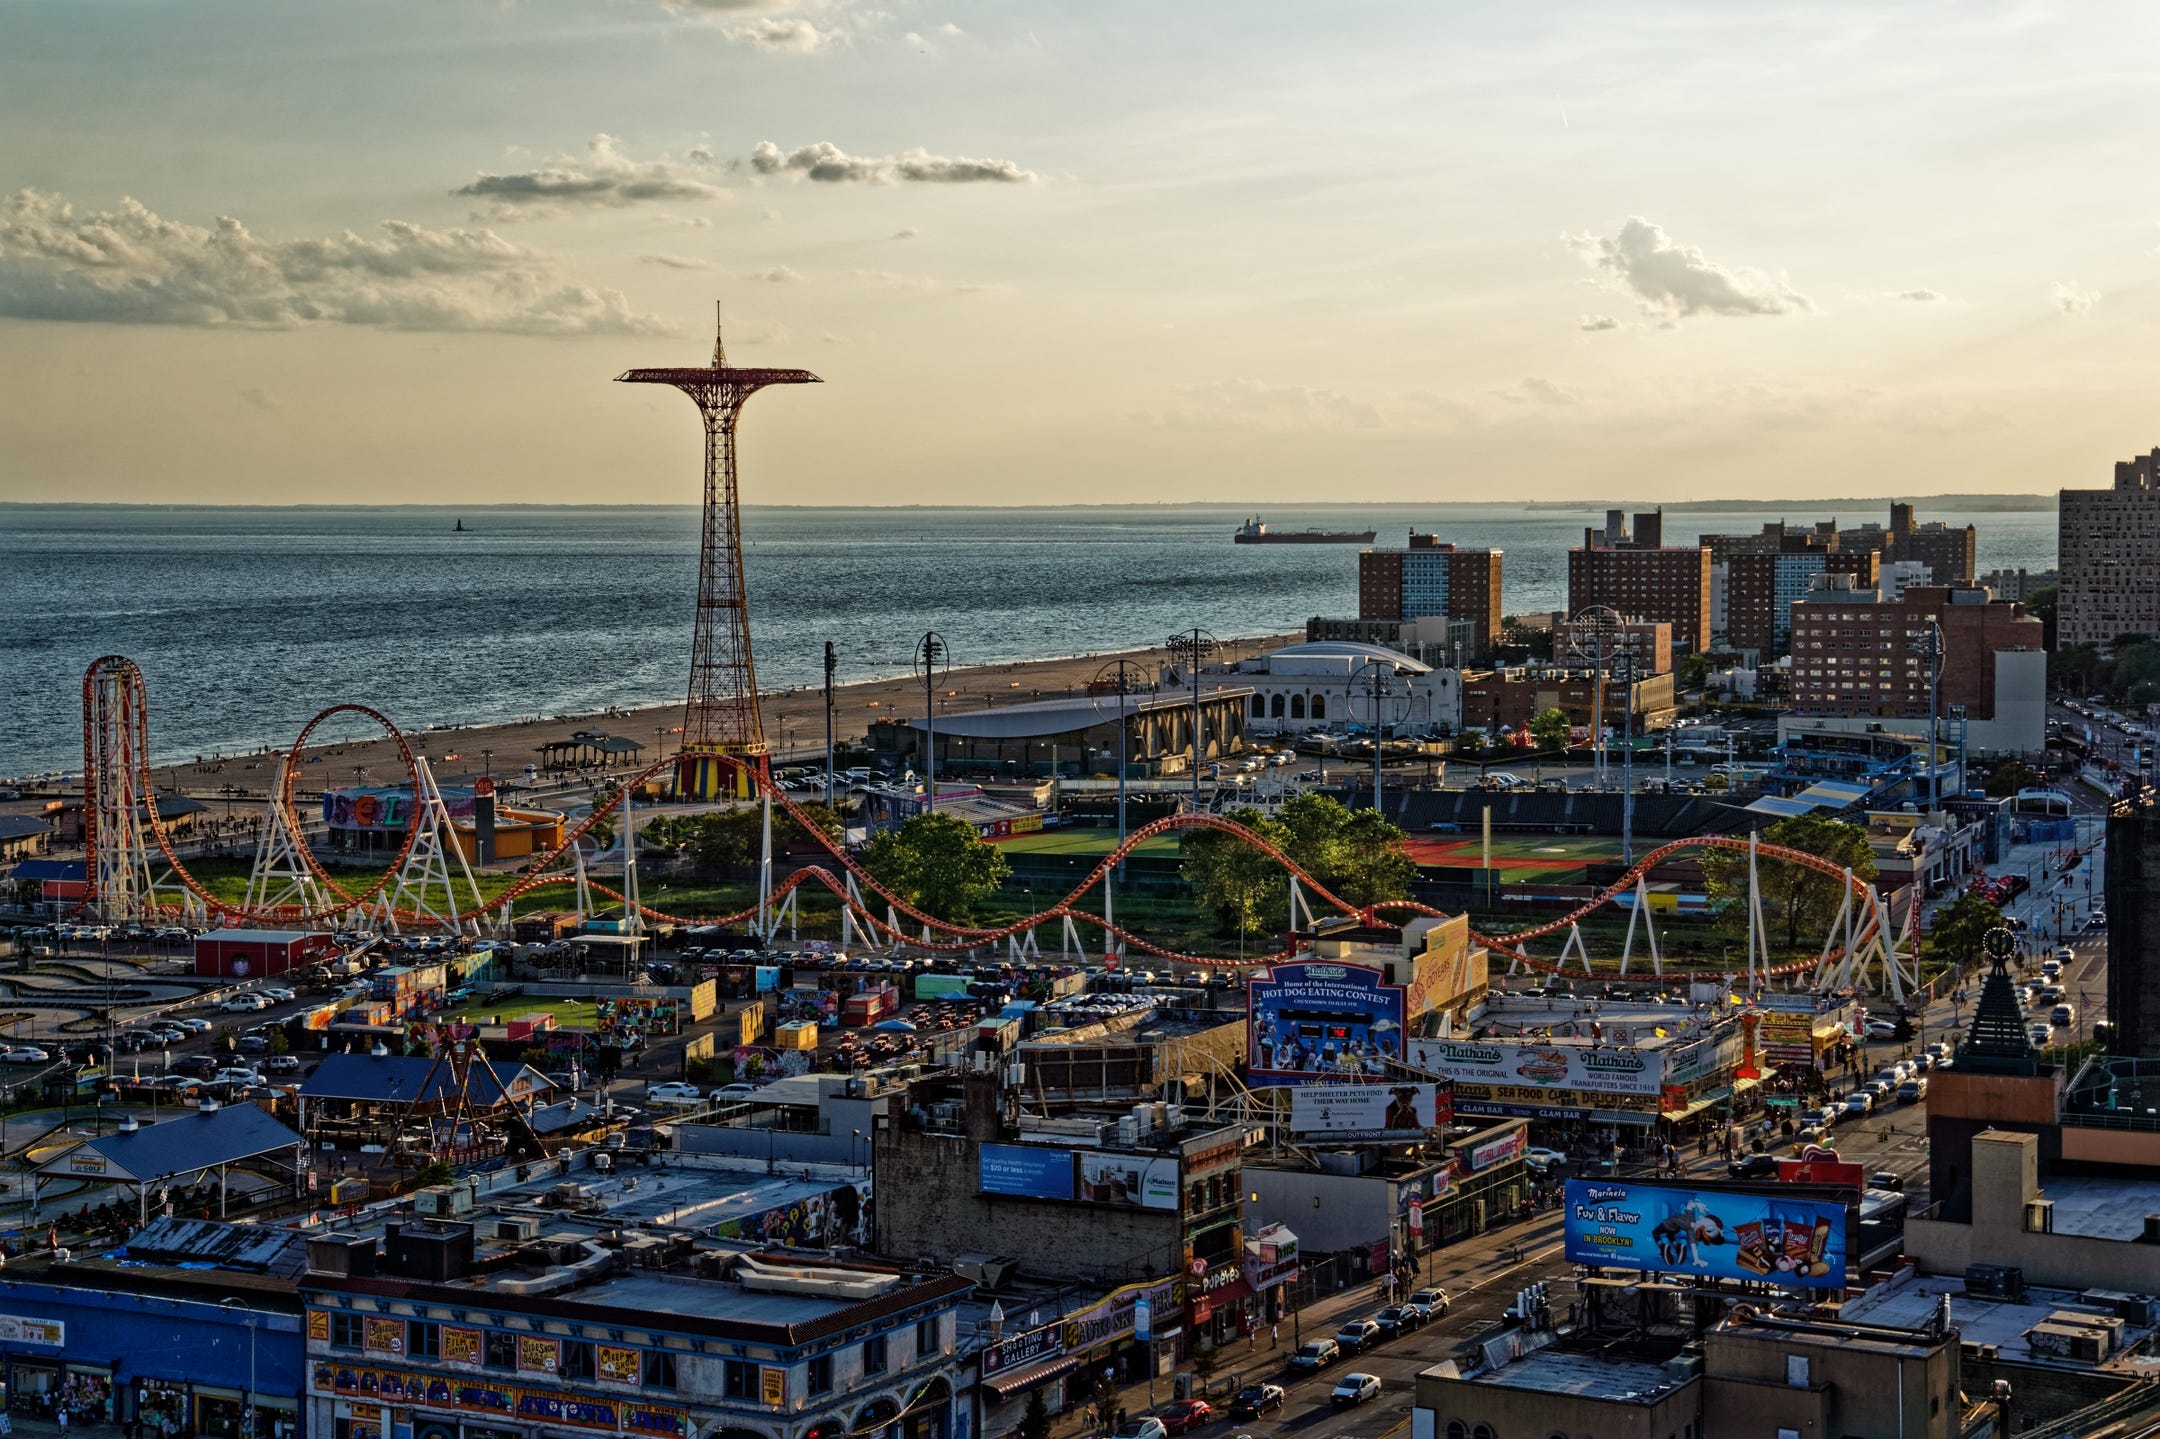 Amusement parks from New York City